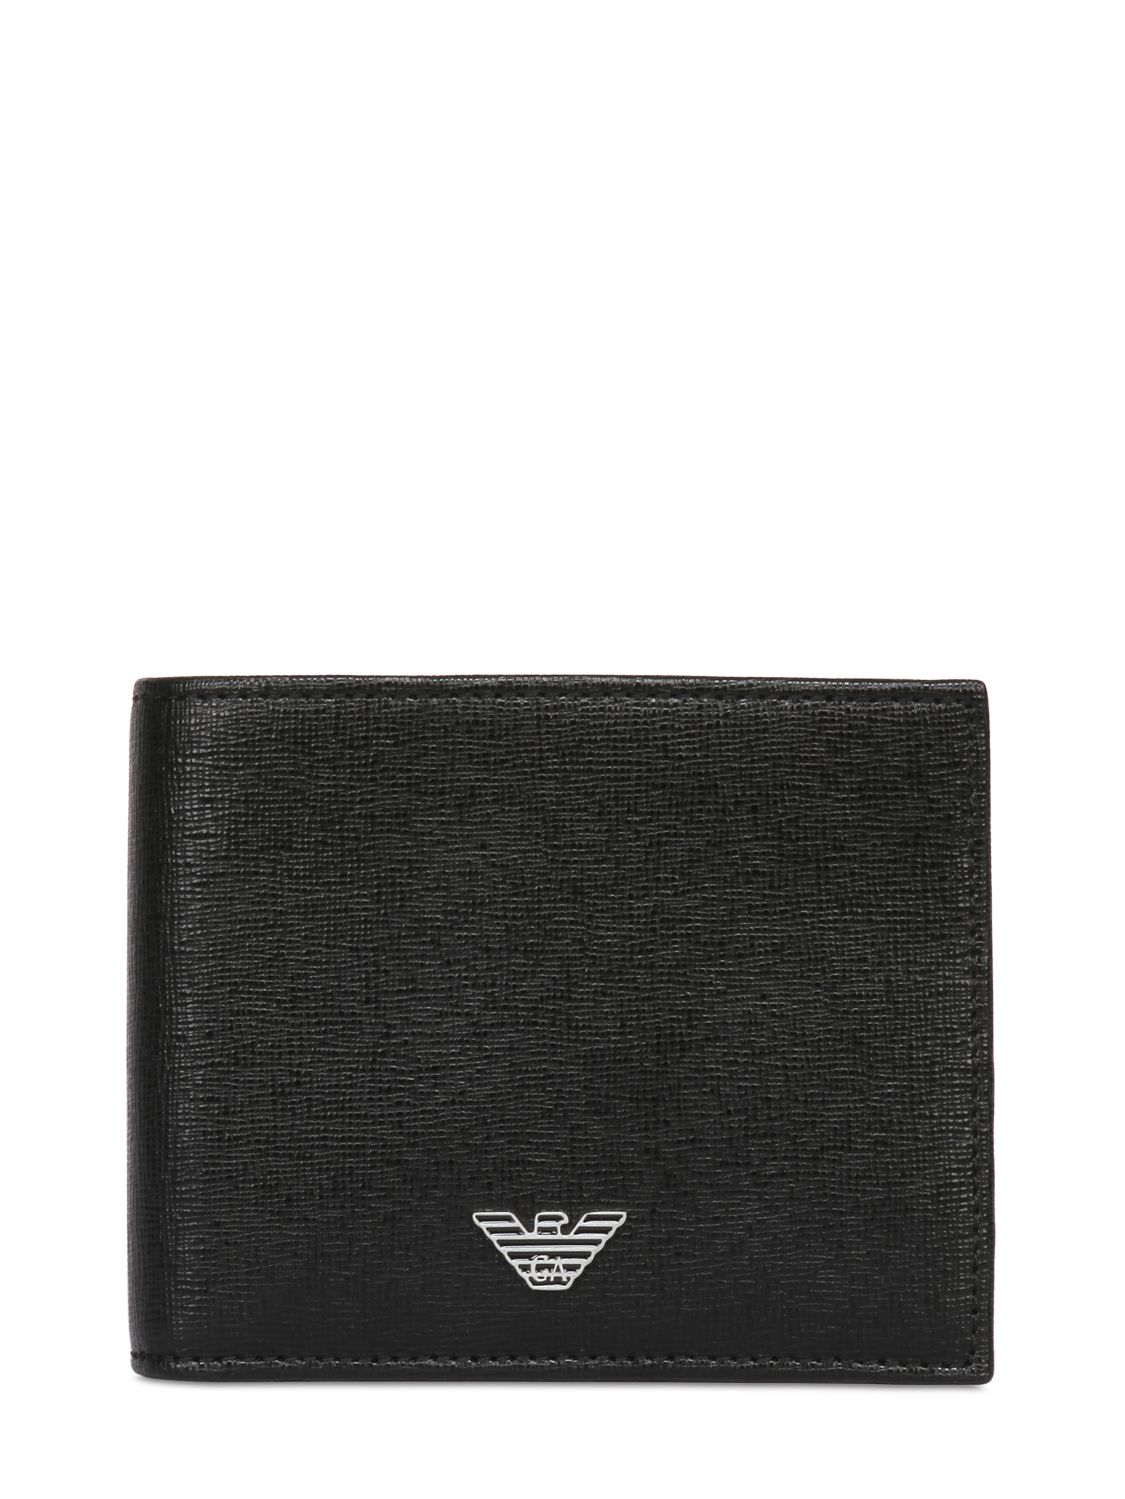 Emporio Armani Embossed Leather Classic Wallet in Black for Men - Lyst